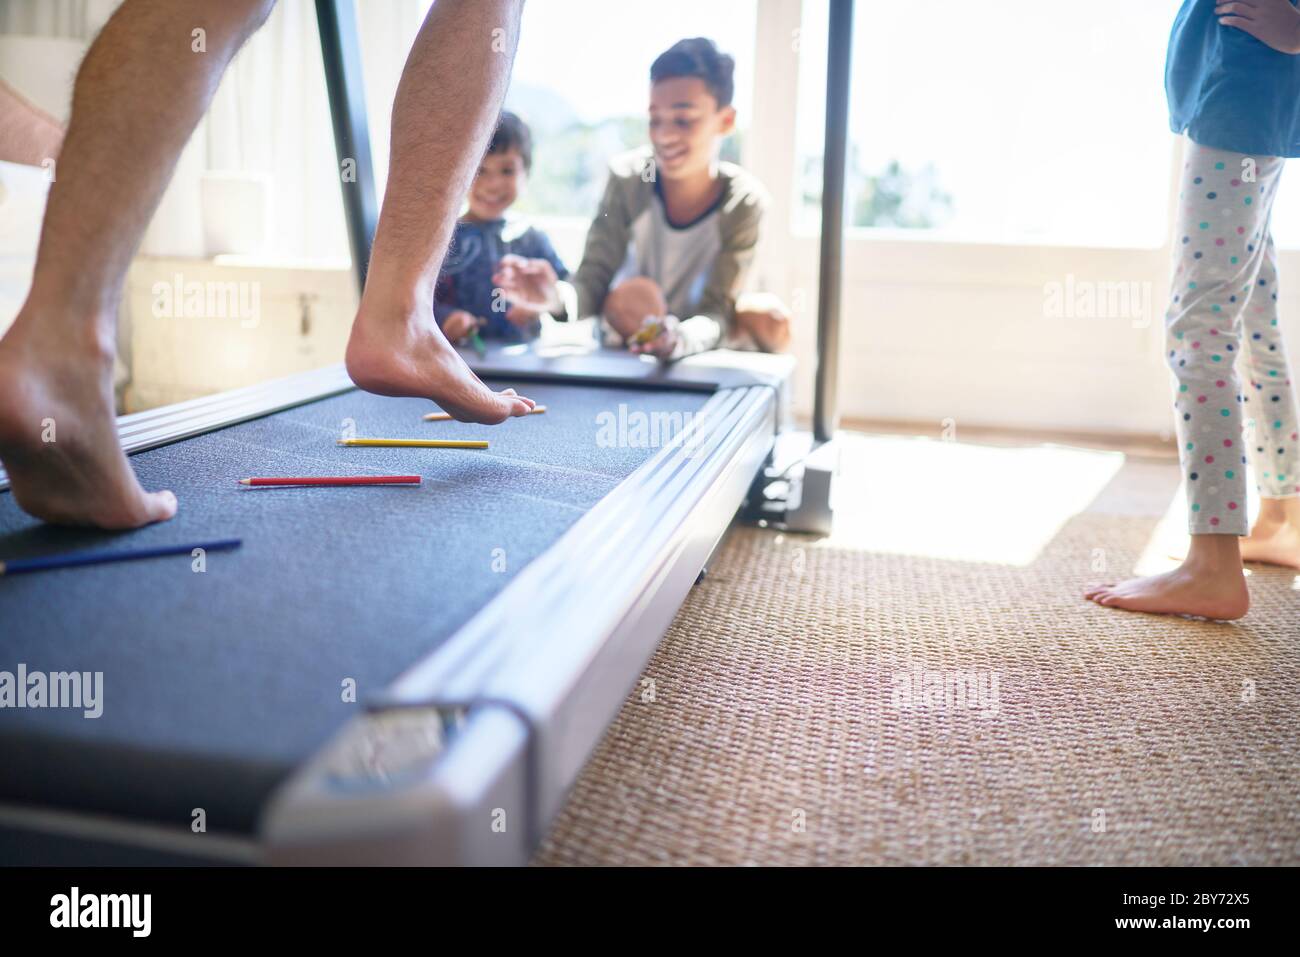 Kids throwing colored pencils on treadmill with father jogging Stock Photo